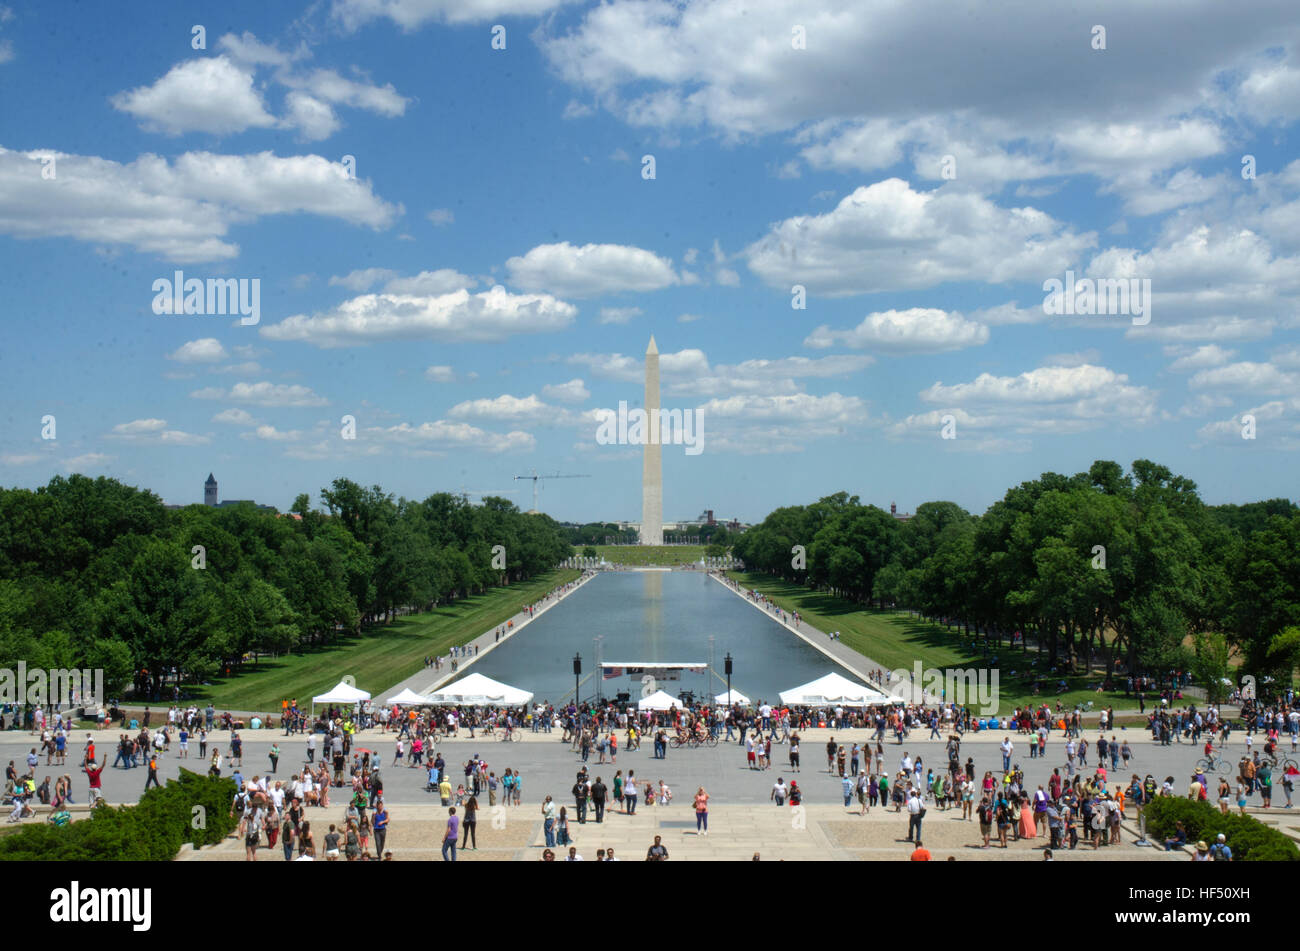 Washington Monument and Reflecting Pool seen from the Lincoln Memorial in Washington DC. Stock Photo